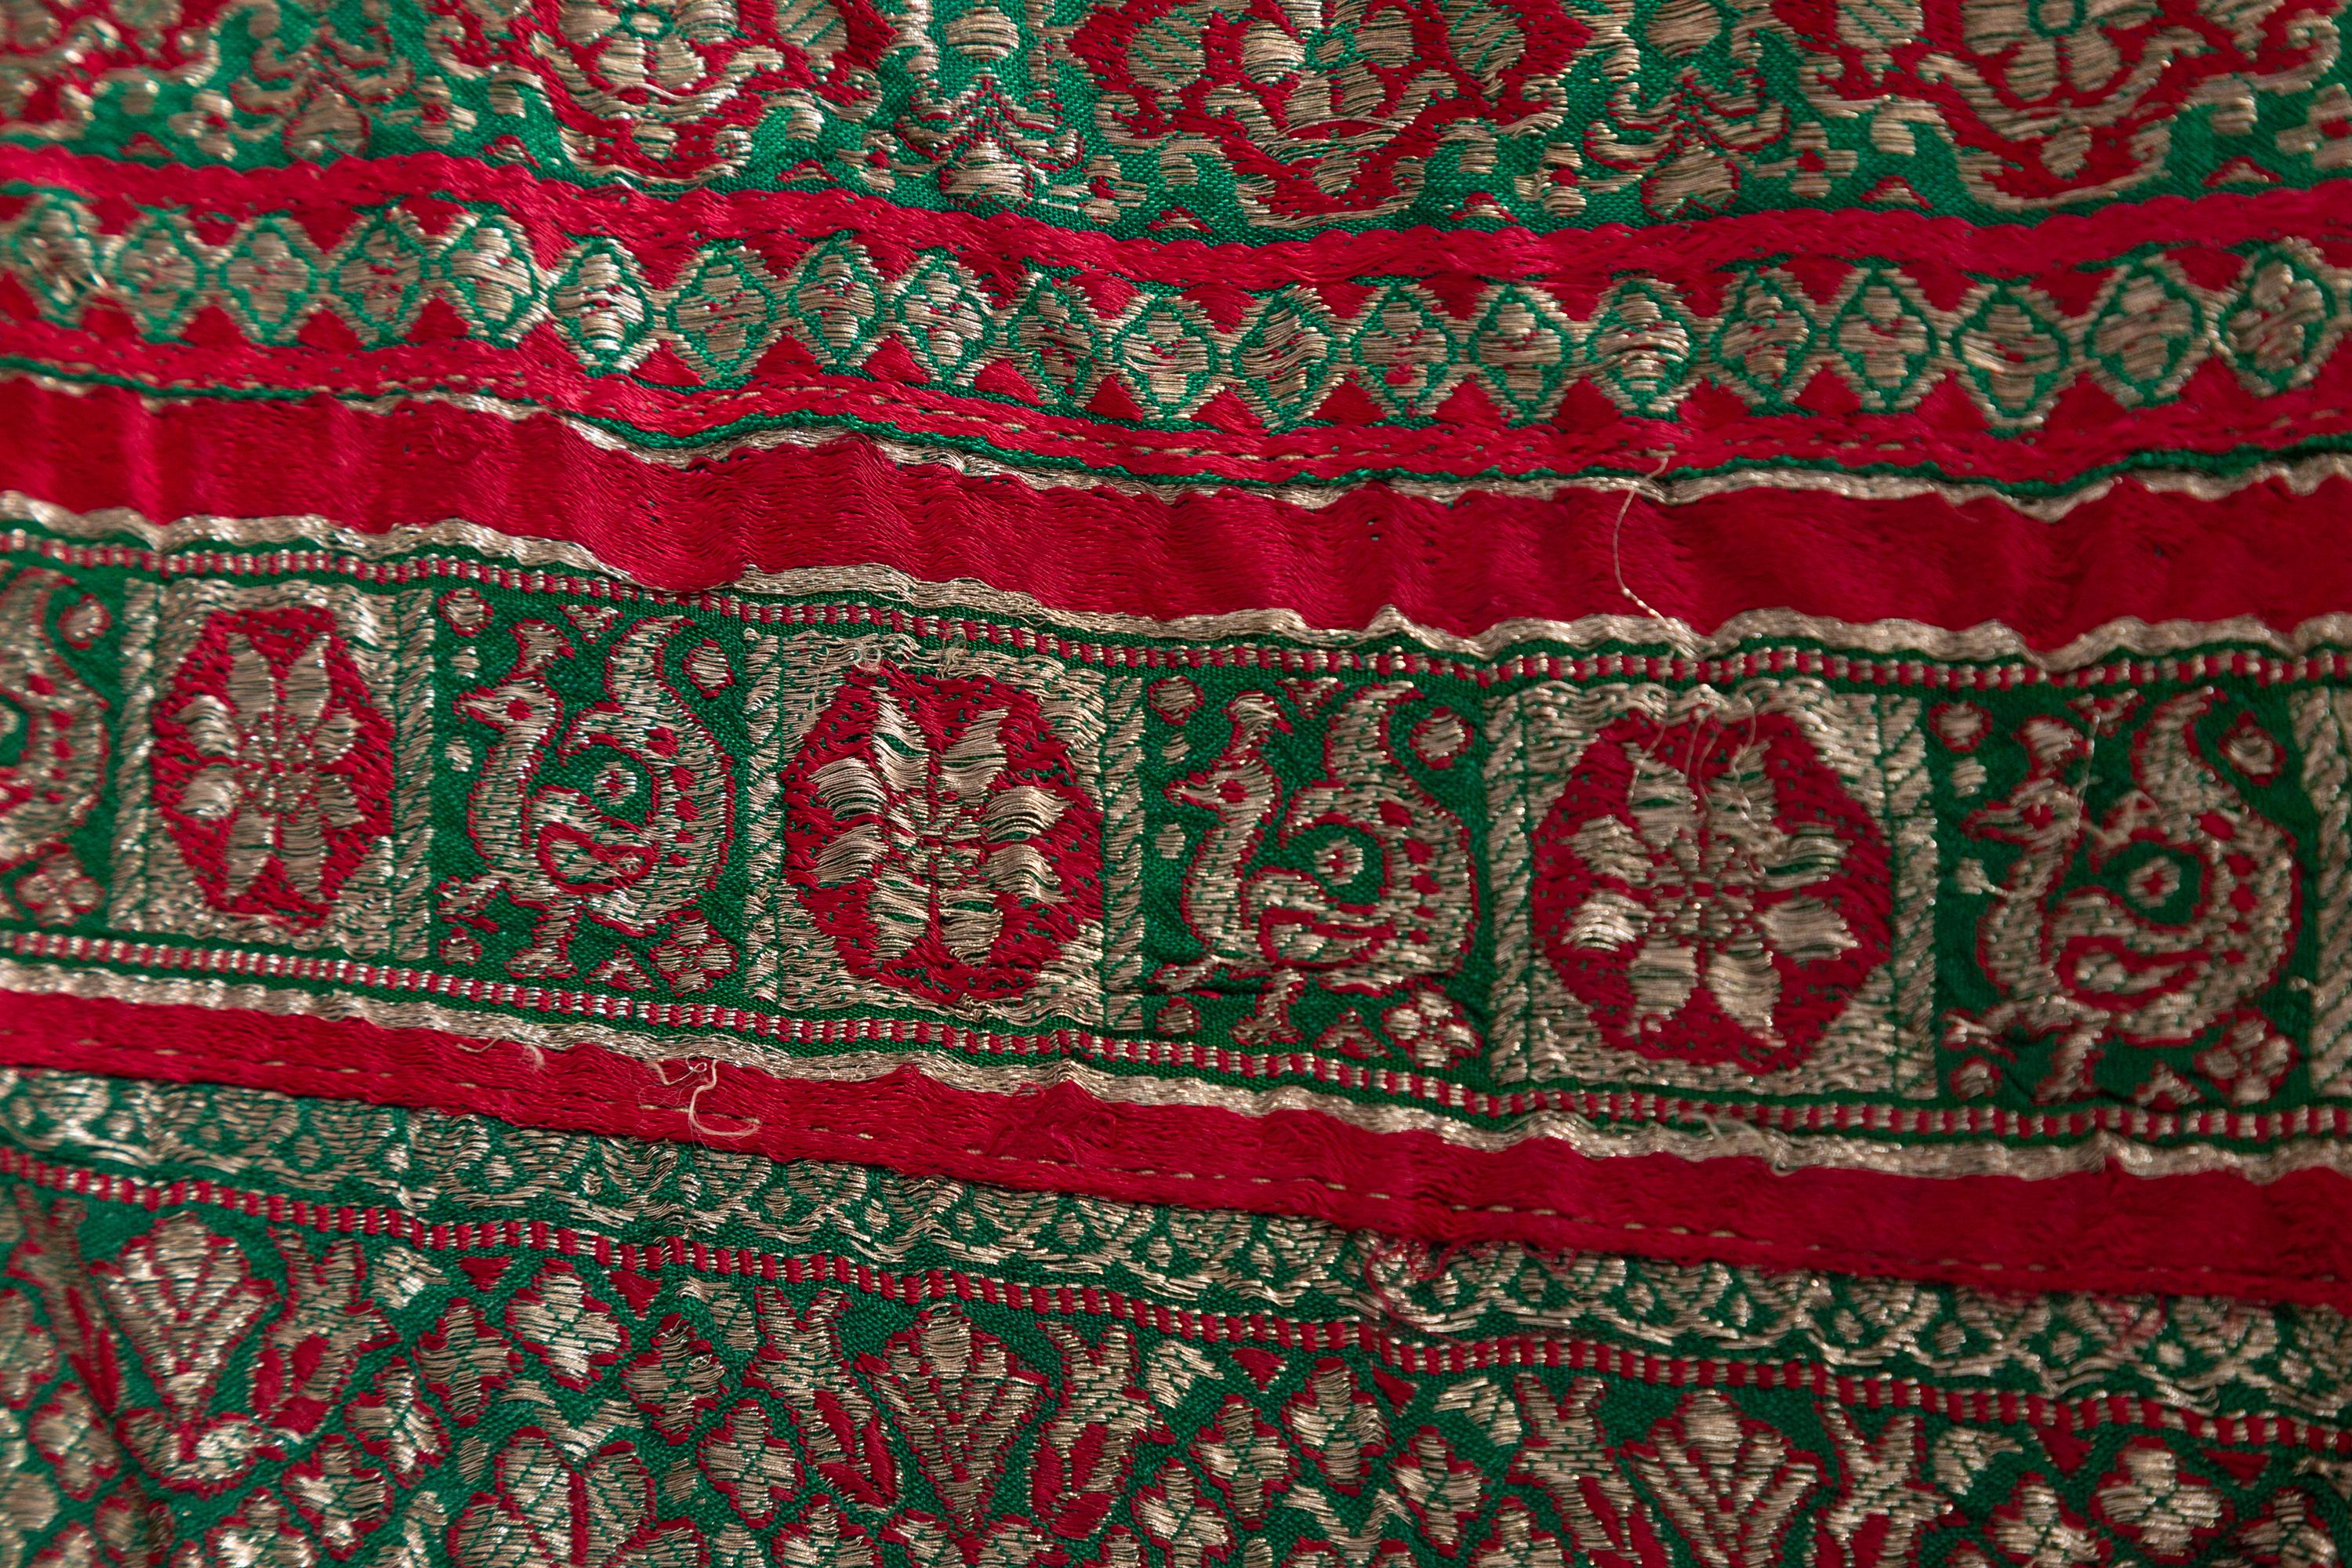 Vintage Indian Silk Embroidered Fabric with Green, Red, Fuchsia and Golden Tones 9